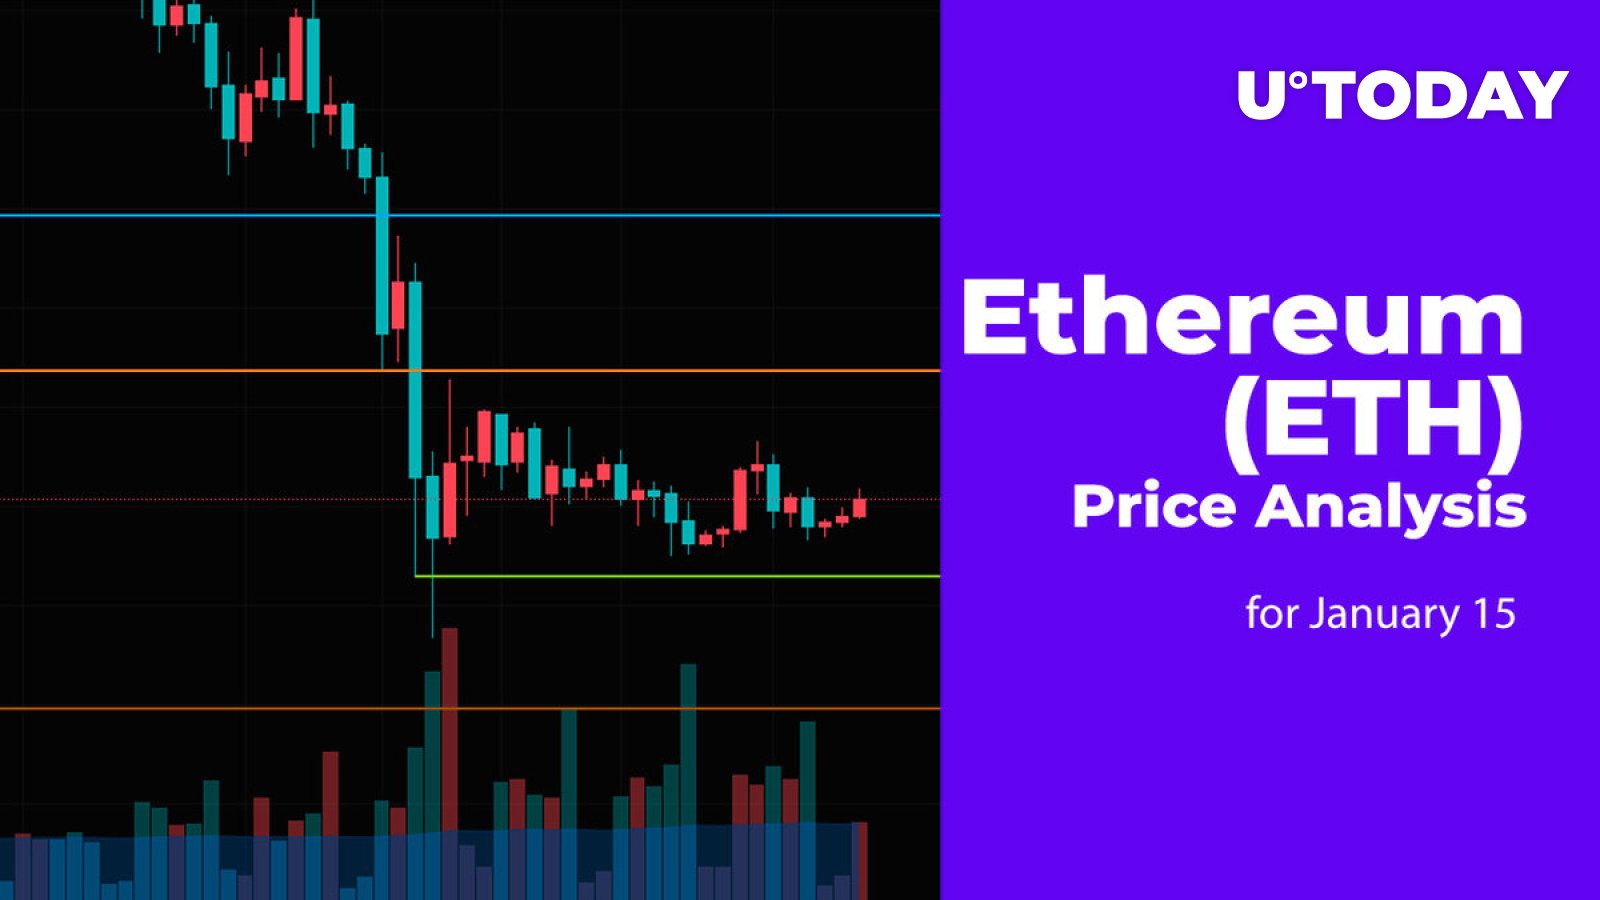 Ethereum (ETH) Price Analysis for January 15